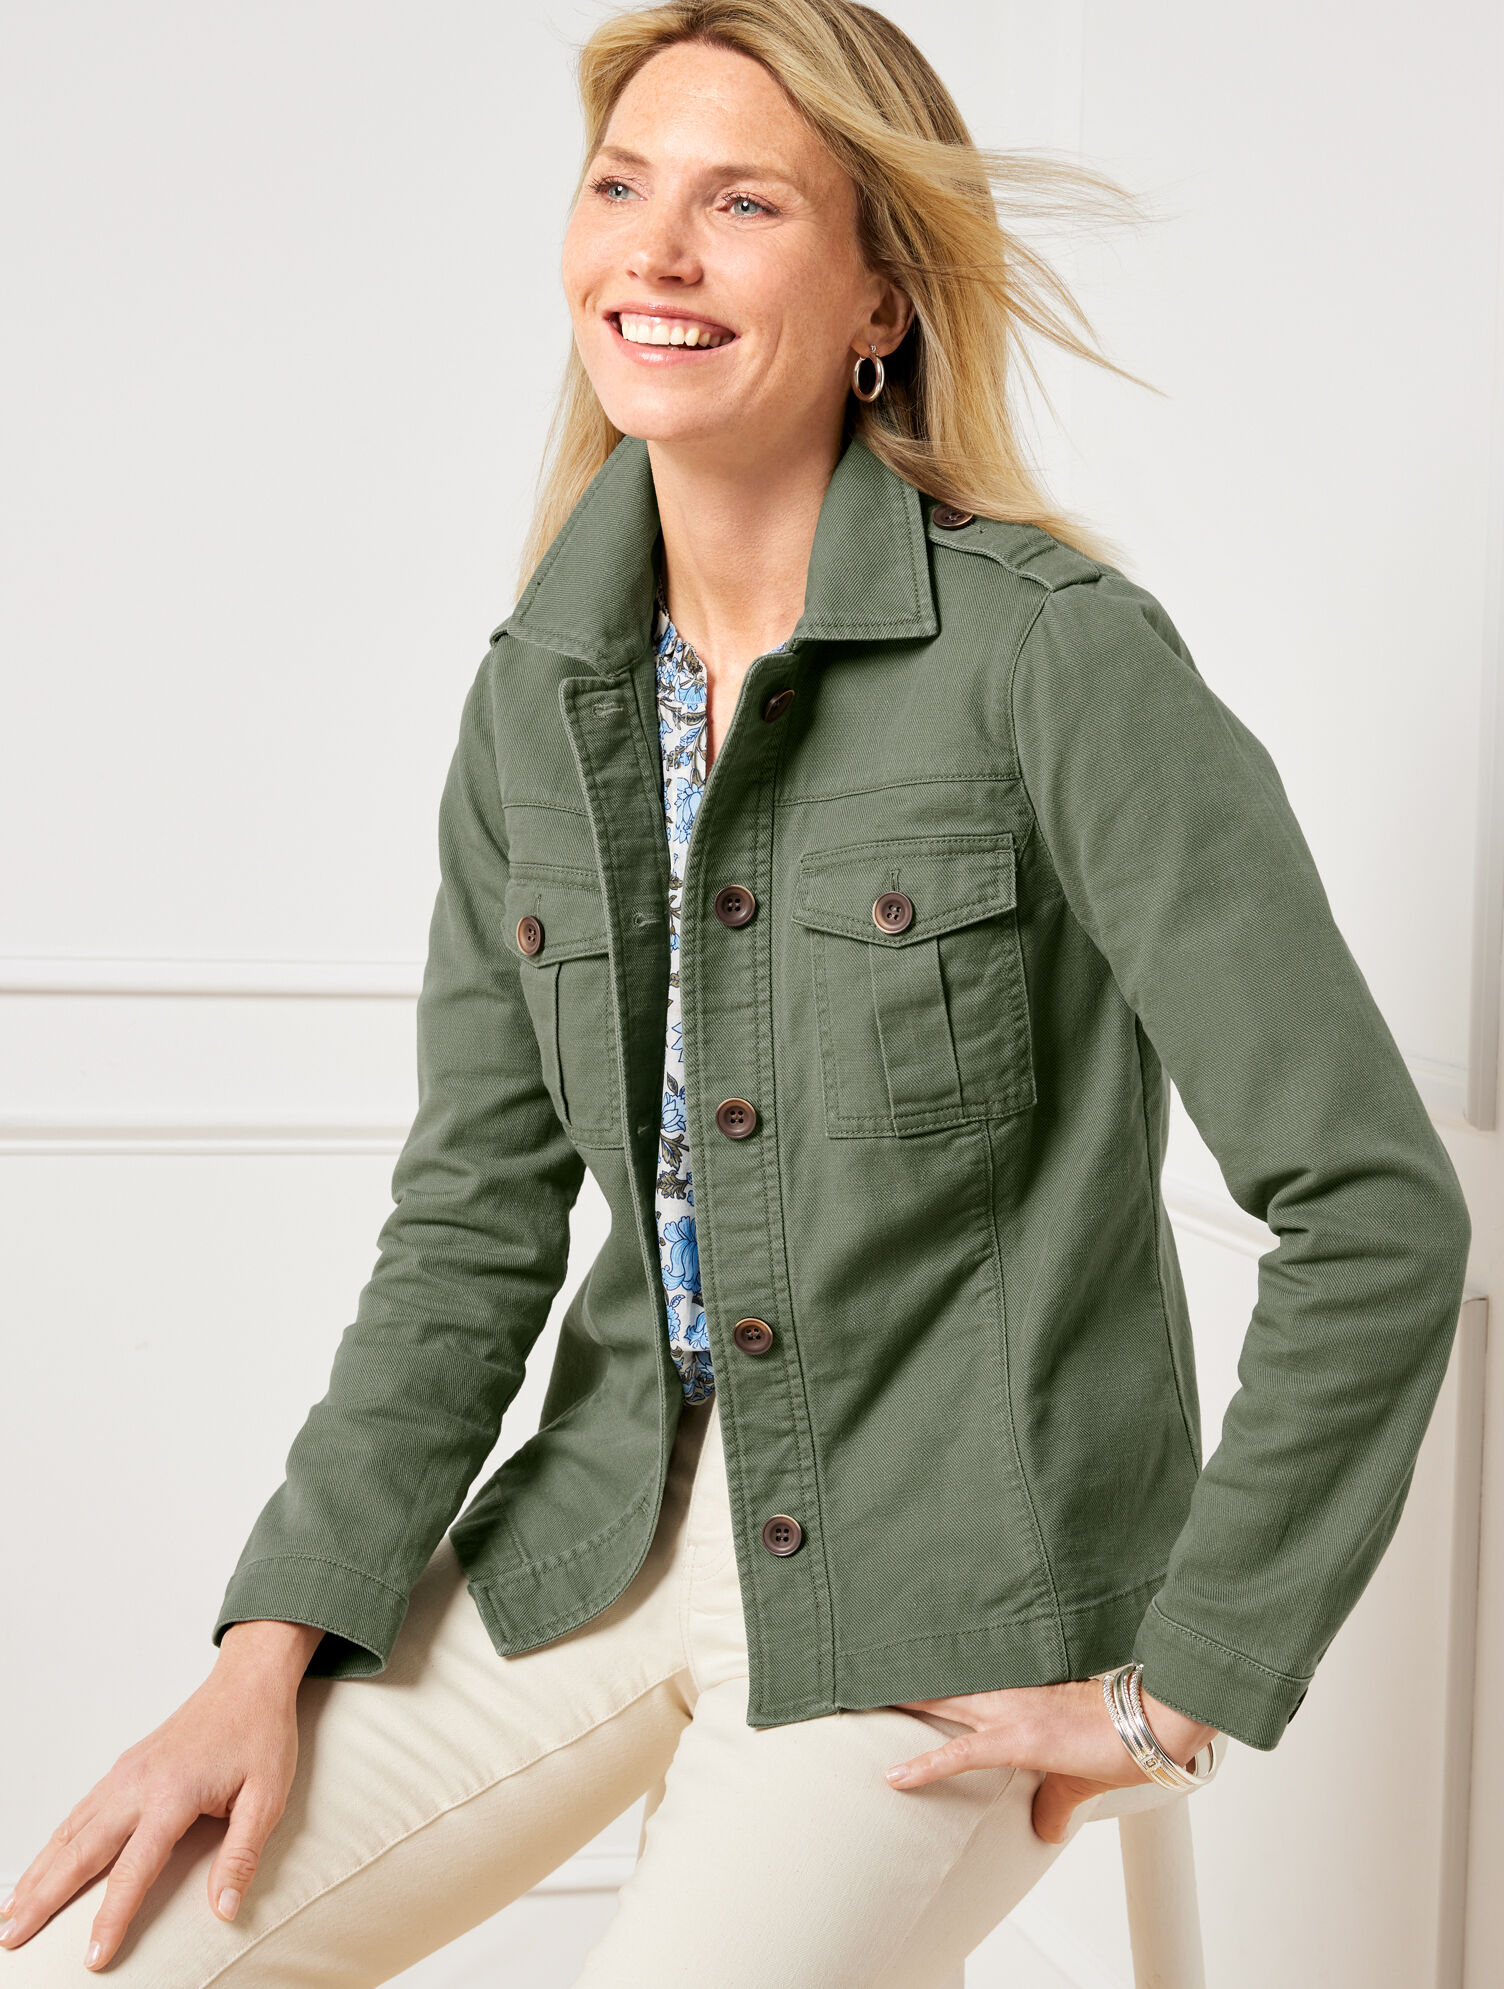 TALBOTS - We're collecting nearly new wear-to-work